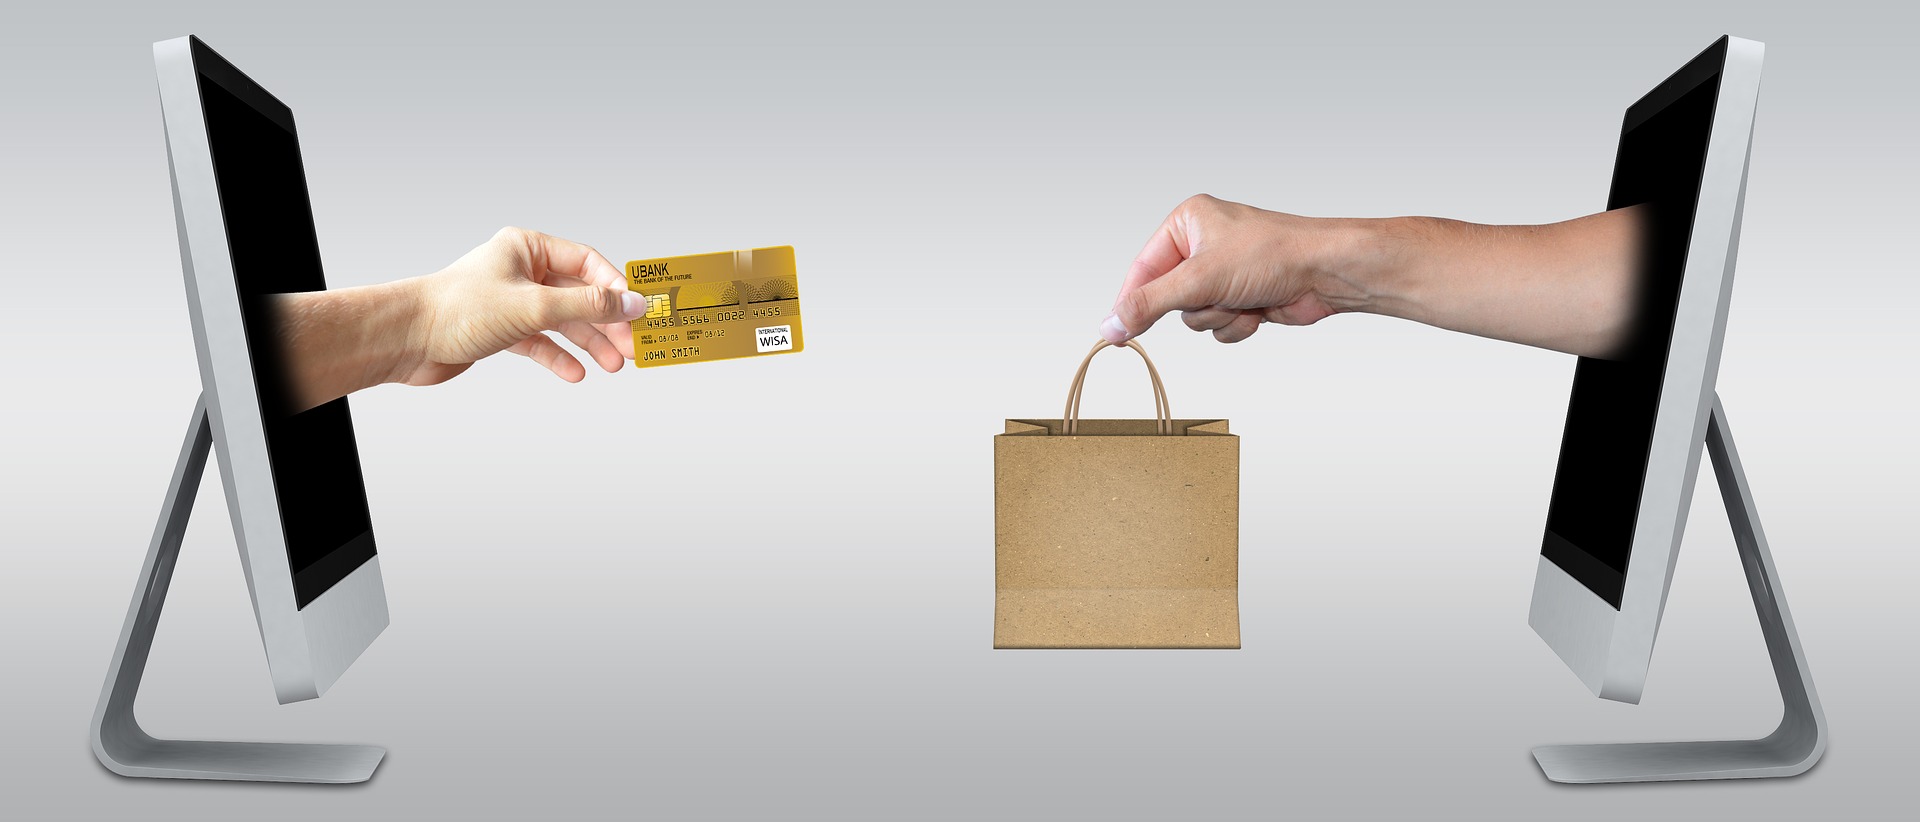 Ecommerce icons credit card and shopping bag leaping out from computer screens